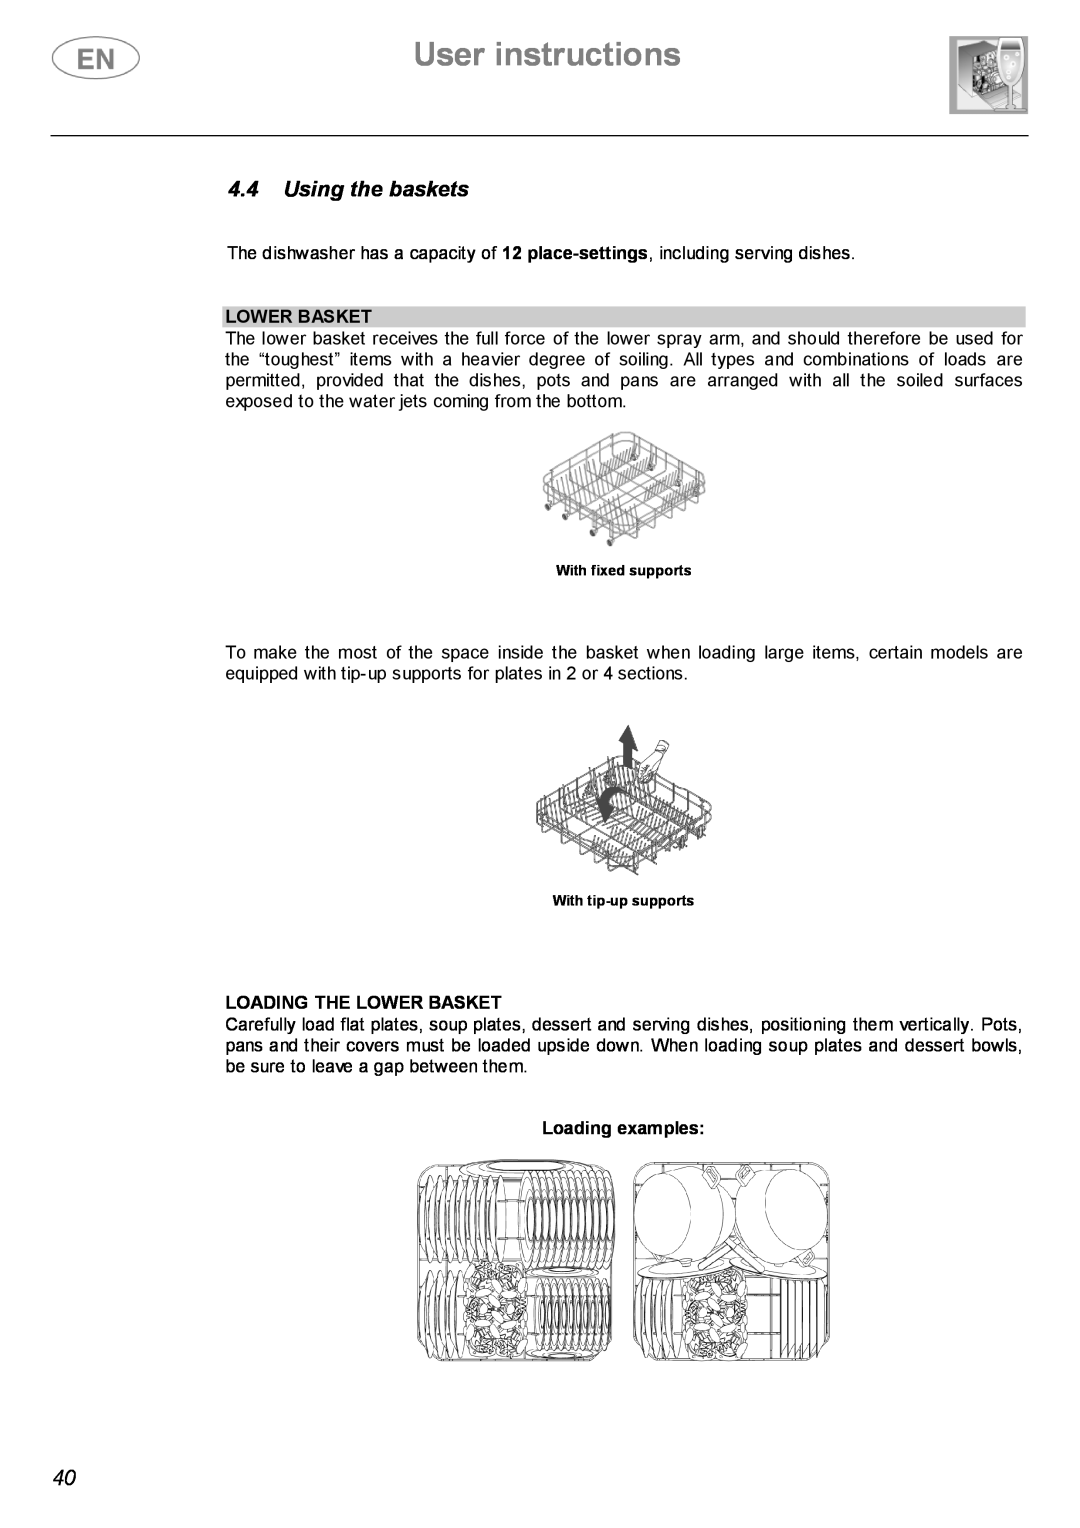 Smeg BL2S, BL1S instruction manual User instructions, 4.4Using the baskets, Loading The Lower Basket, Loading examples 